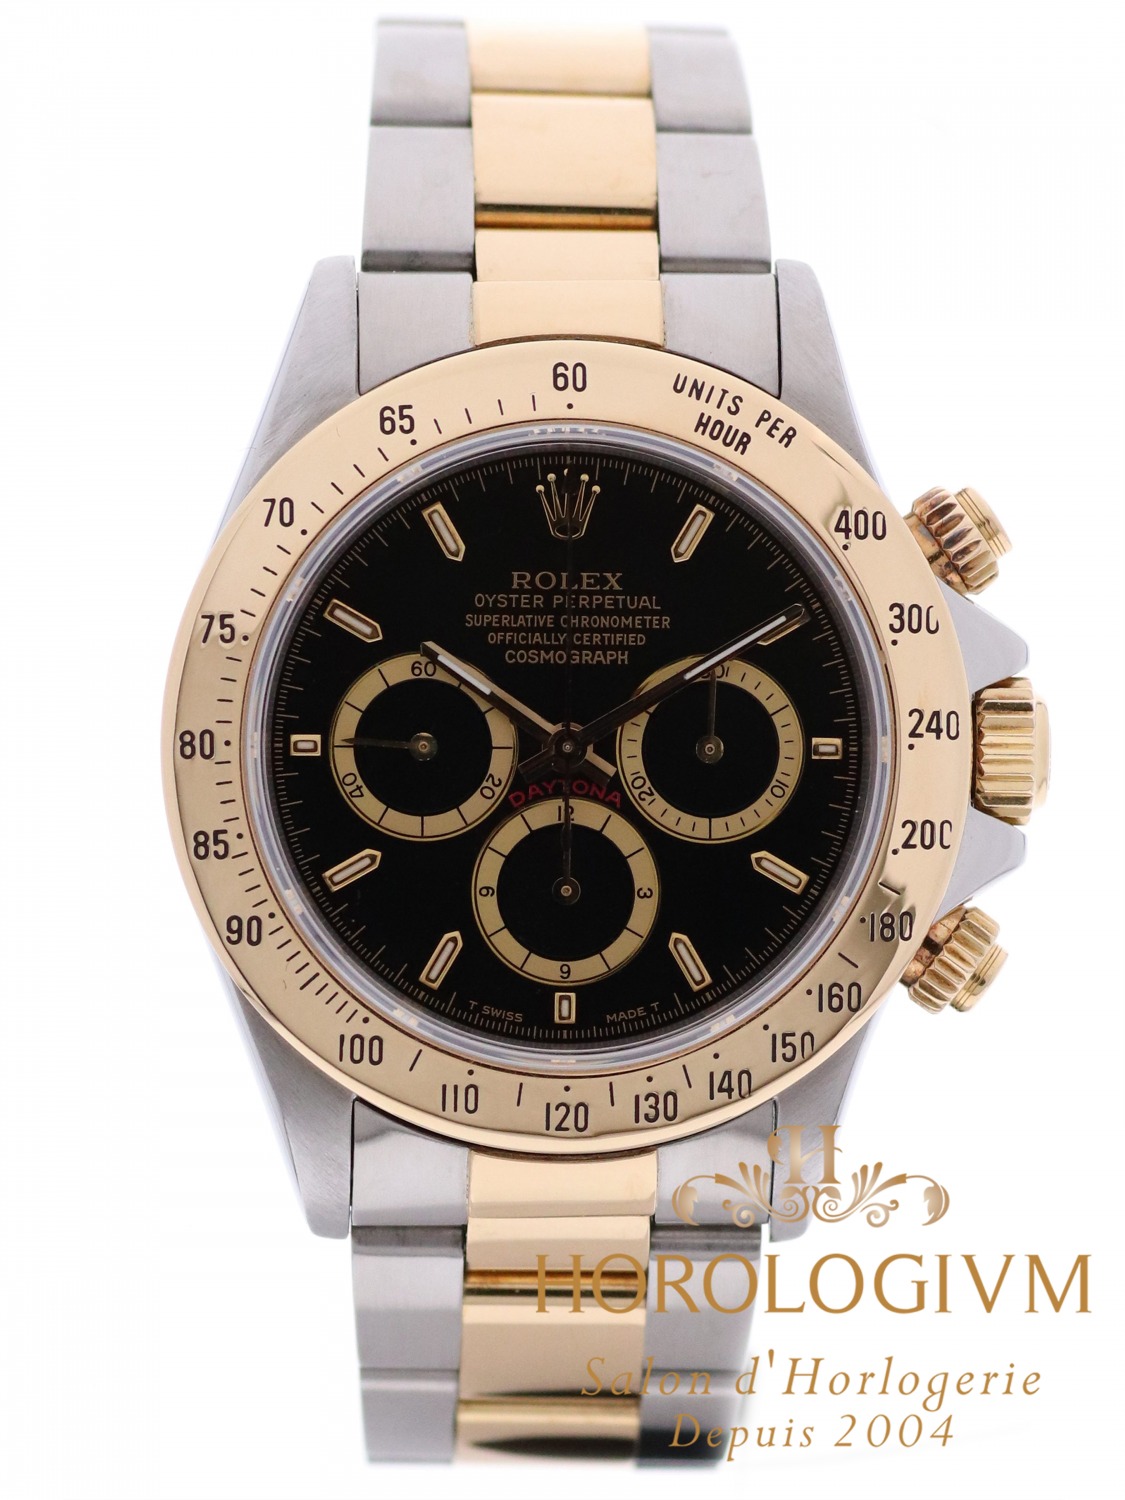 Rolex Daytona Cosmograph Two-Tone 16523 watch, two-tone (bi-colored) silver and yellow gold